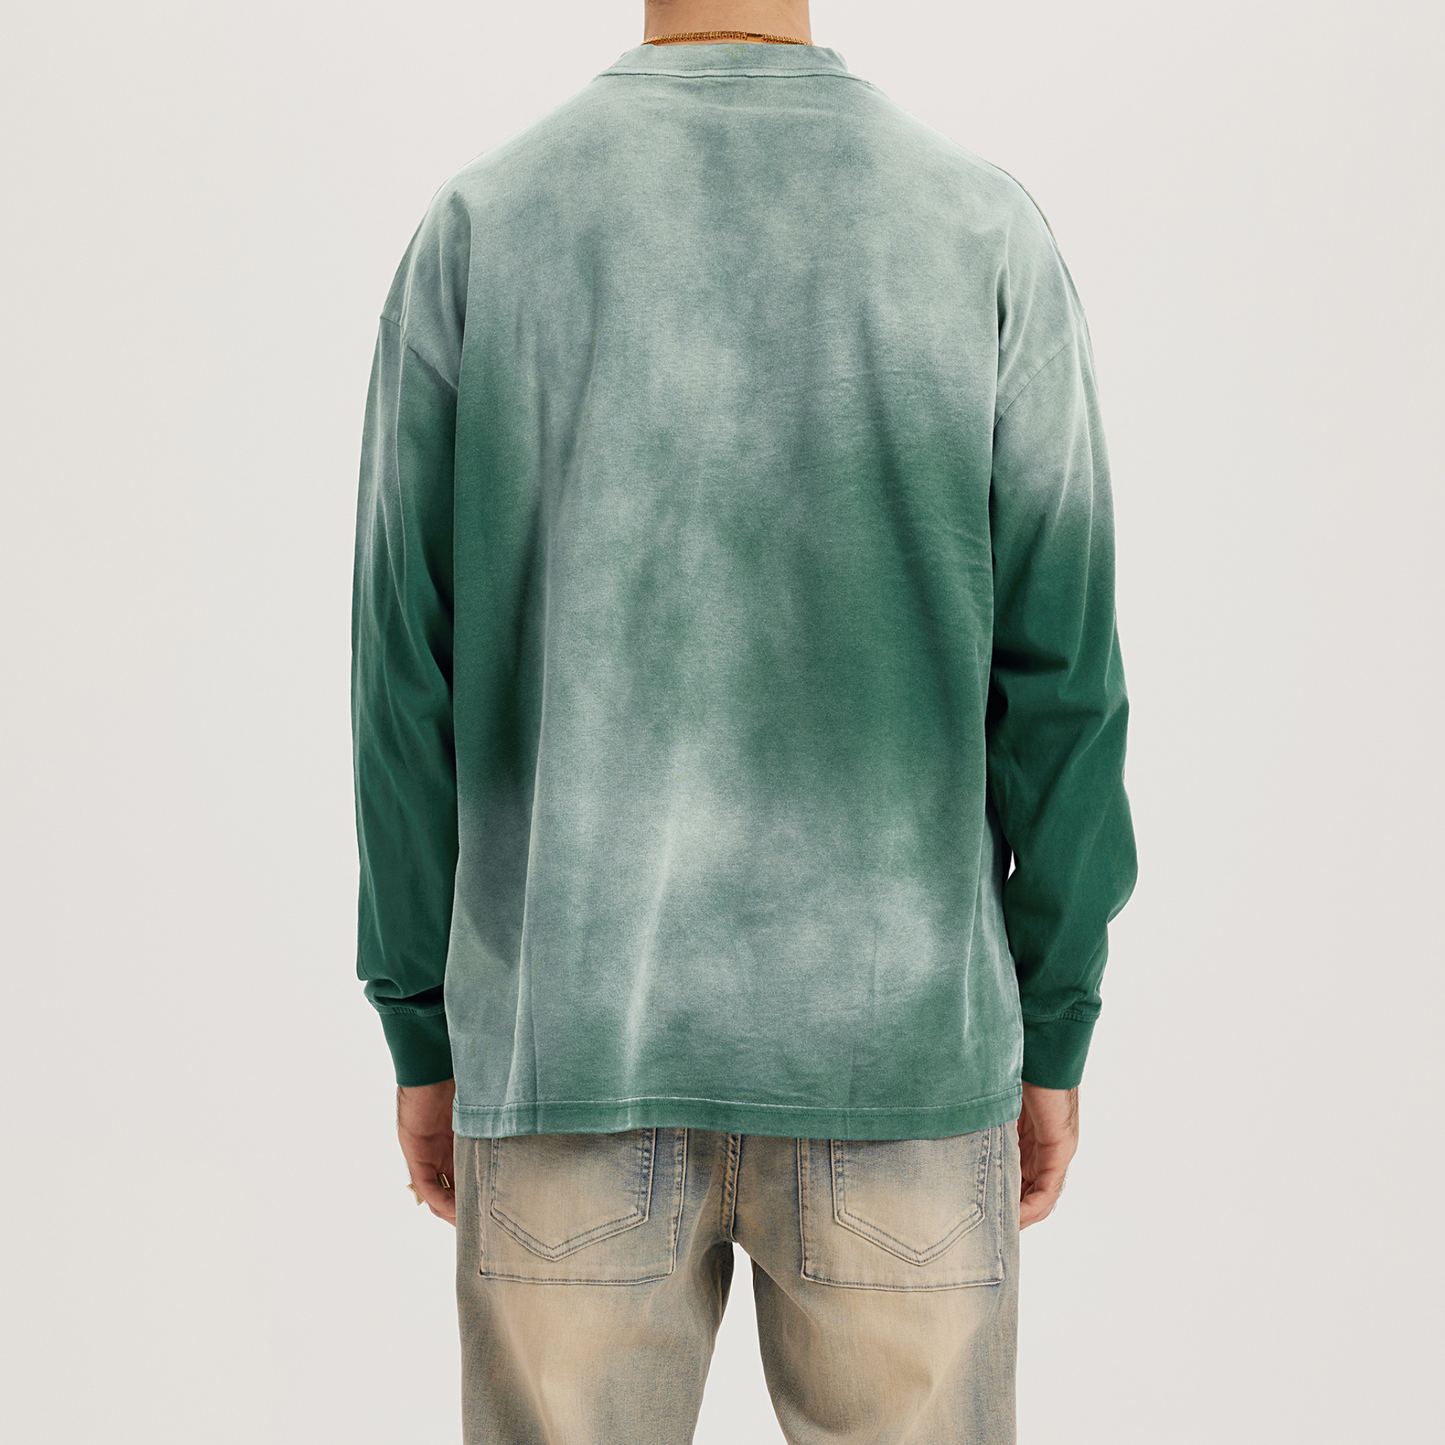 back of model wearing faded green crewneck, washed dyed color, luxury streetwear aesthetic